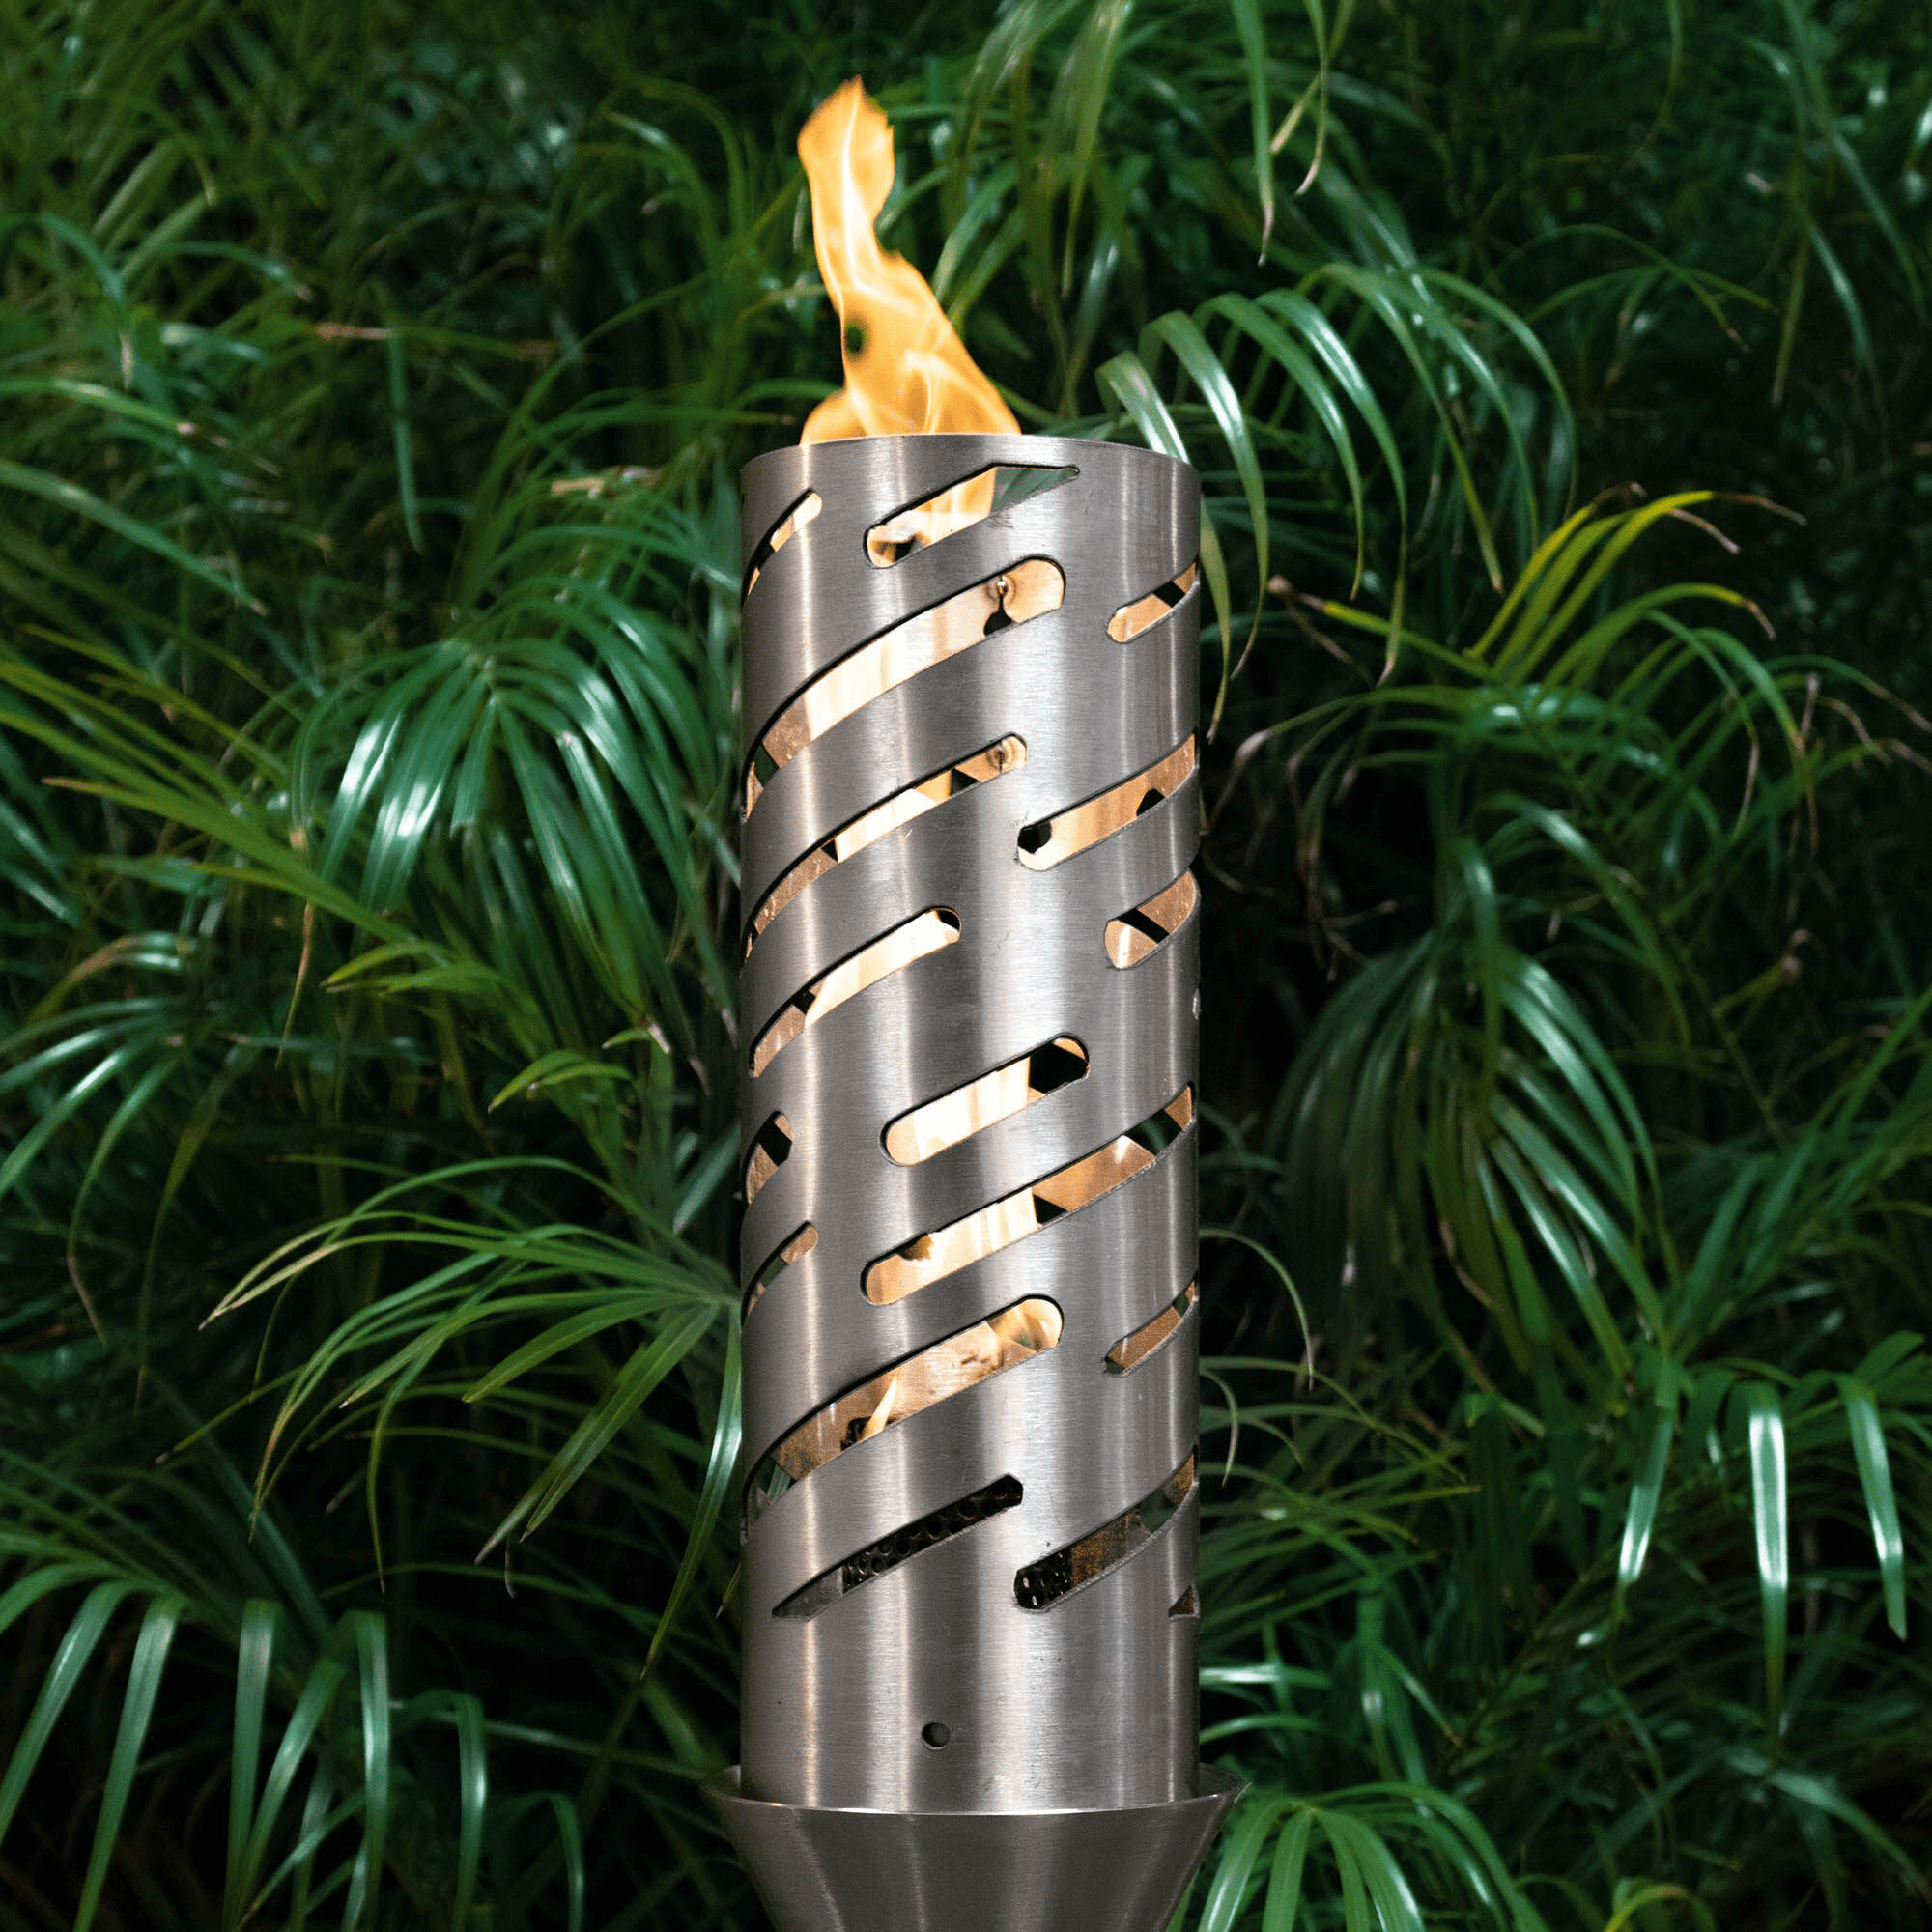 The Outdoor Plus Torch The Outdoor Plus Shooting Star Fire Torch - Stainless Steel OPT-TT21M